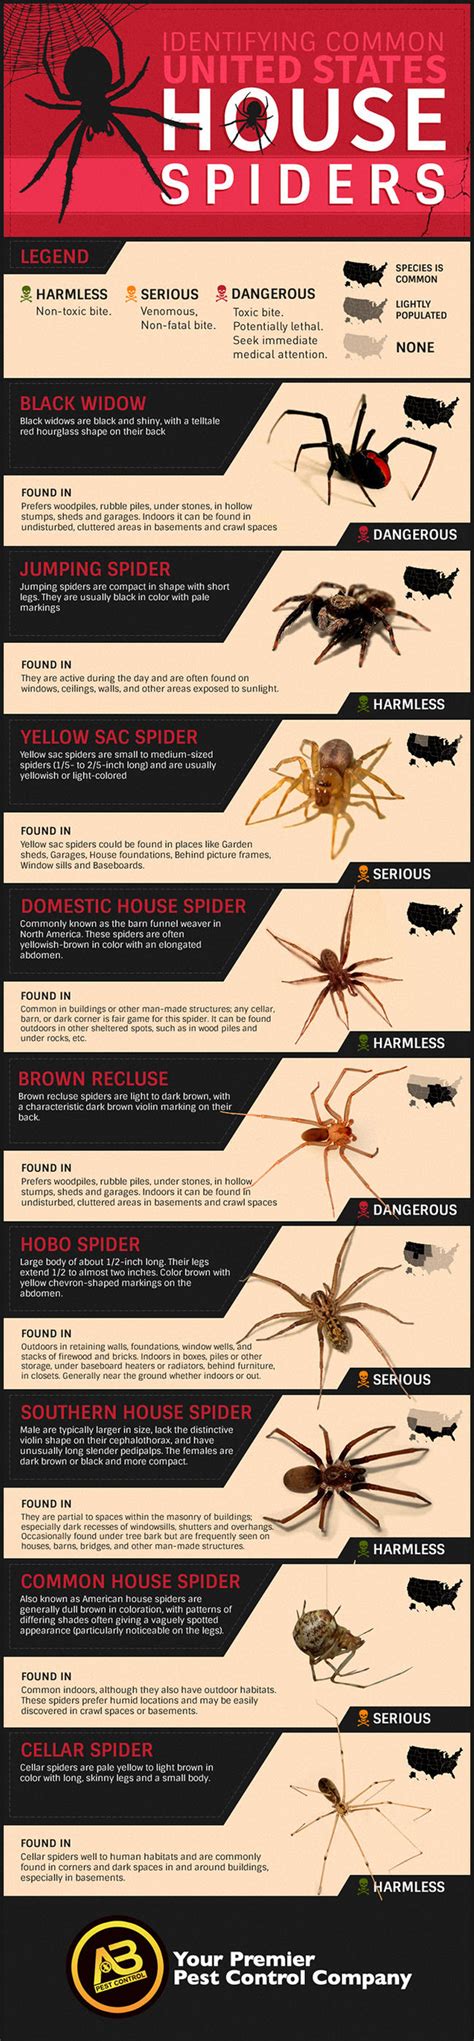 How To Identify Common Poisonous Spiders In Your Home